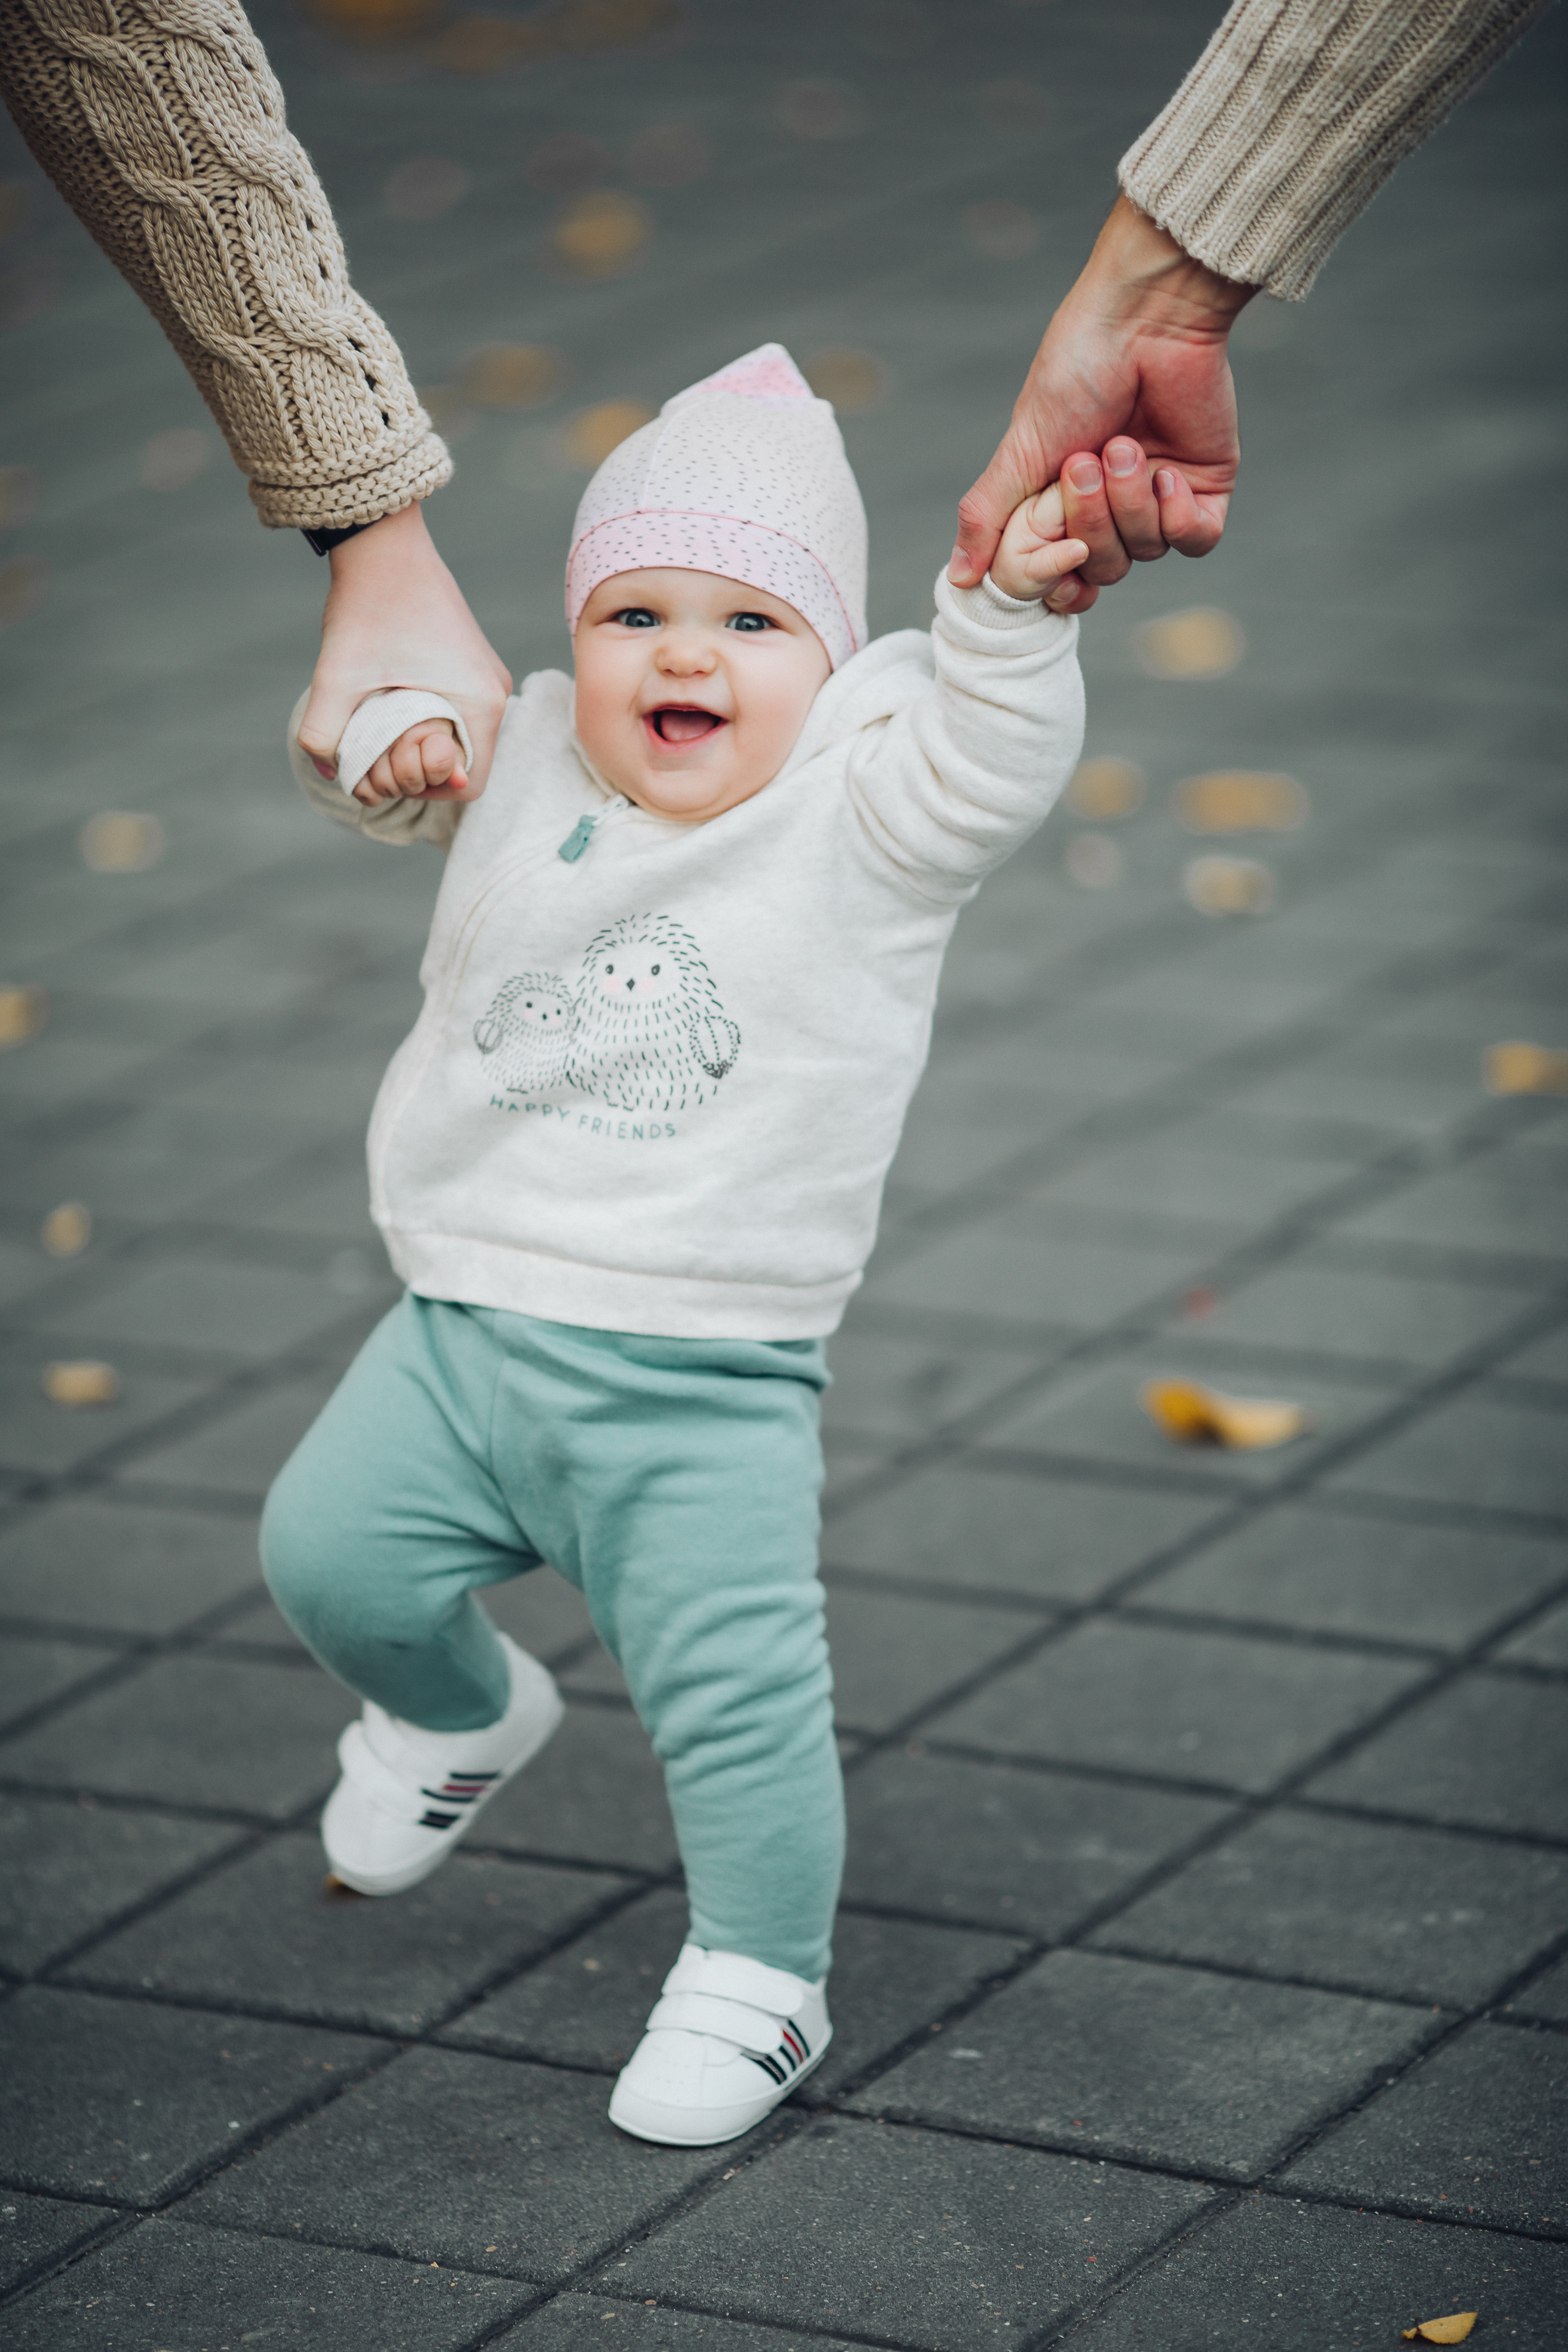 portrait-cute-sweet-baby-during-walking-outside-parents-holding-their-satisfied-child-by-hands-while-it-walking-happy-smiling-infant-white-sweater-green-pants-white-sneakers-doing-steps